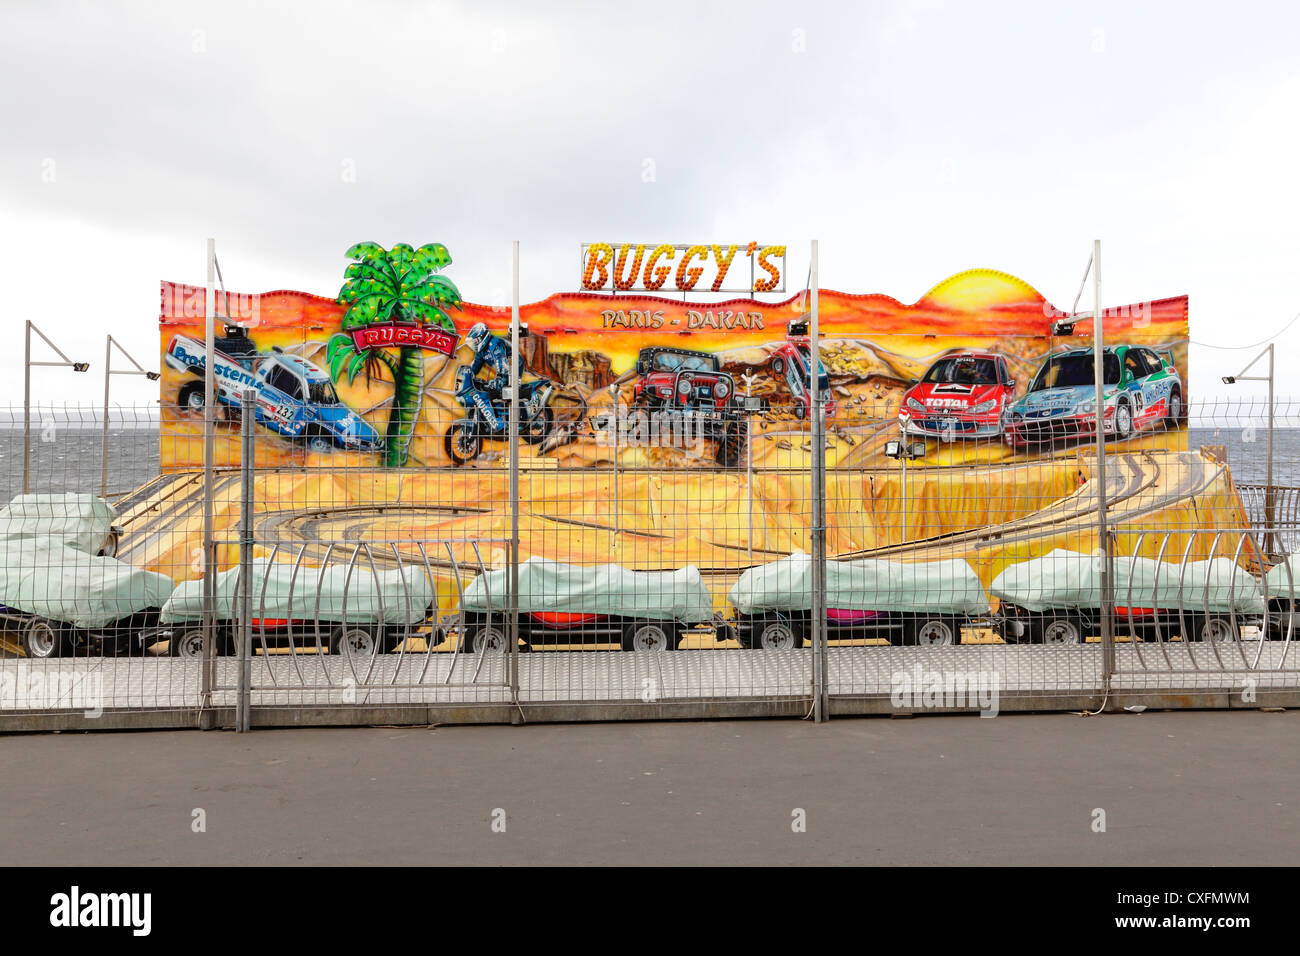 Fairground ride closed for Winter in the seaside town of Largs in North Ayrshire, Scotland, UK, Europe Stock Photo